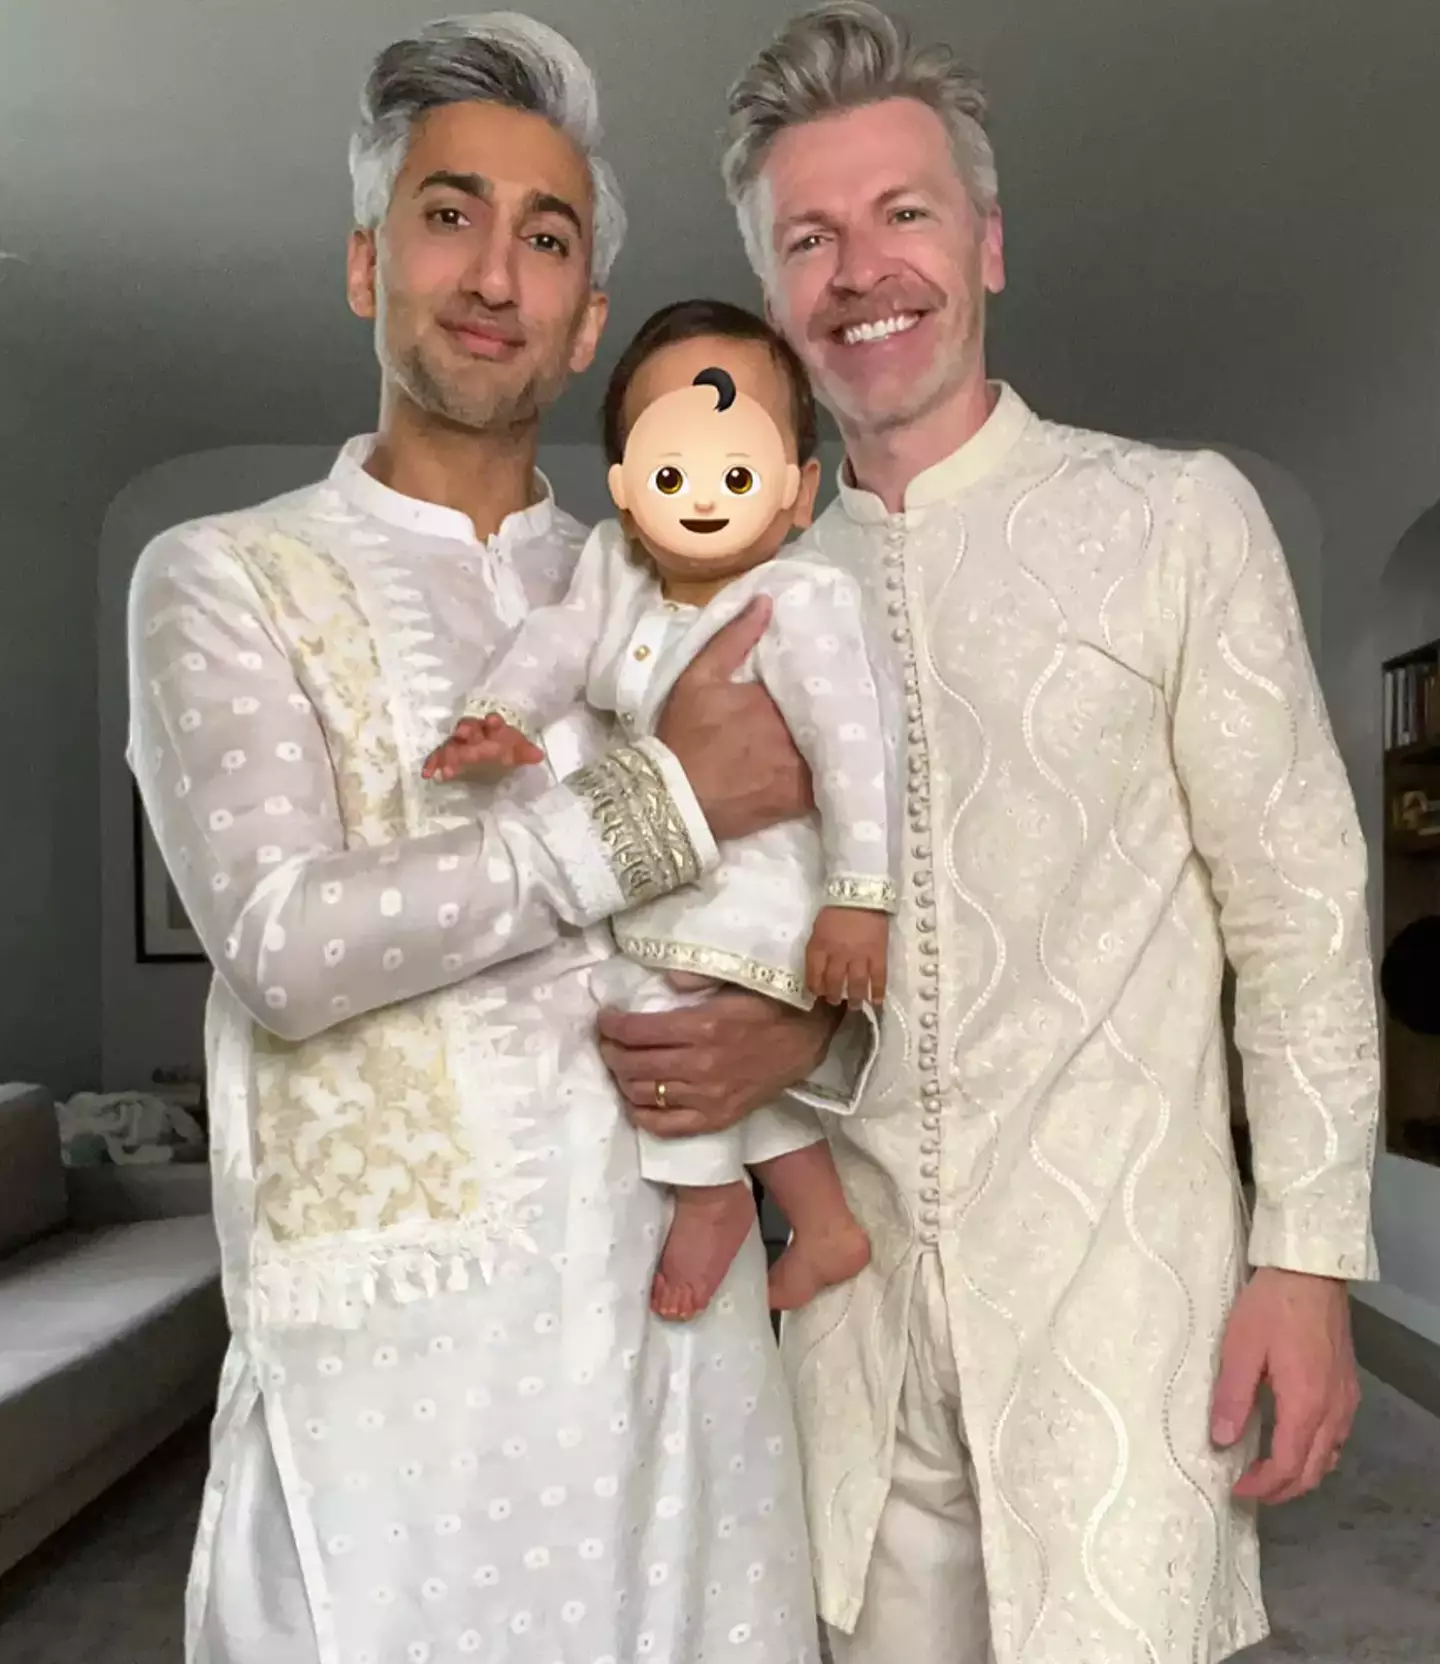 Tan and Rob France welcomed their son, Ismail, into the world in 2021.